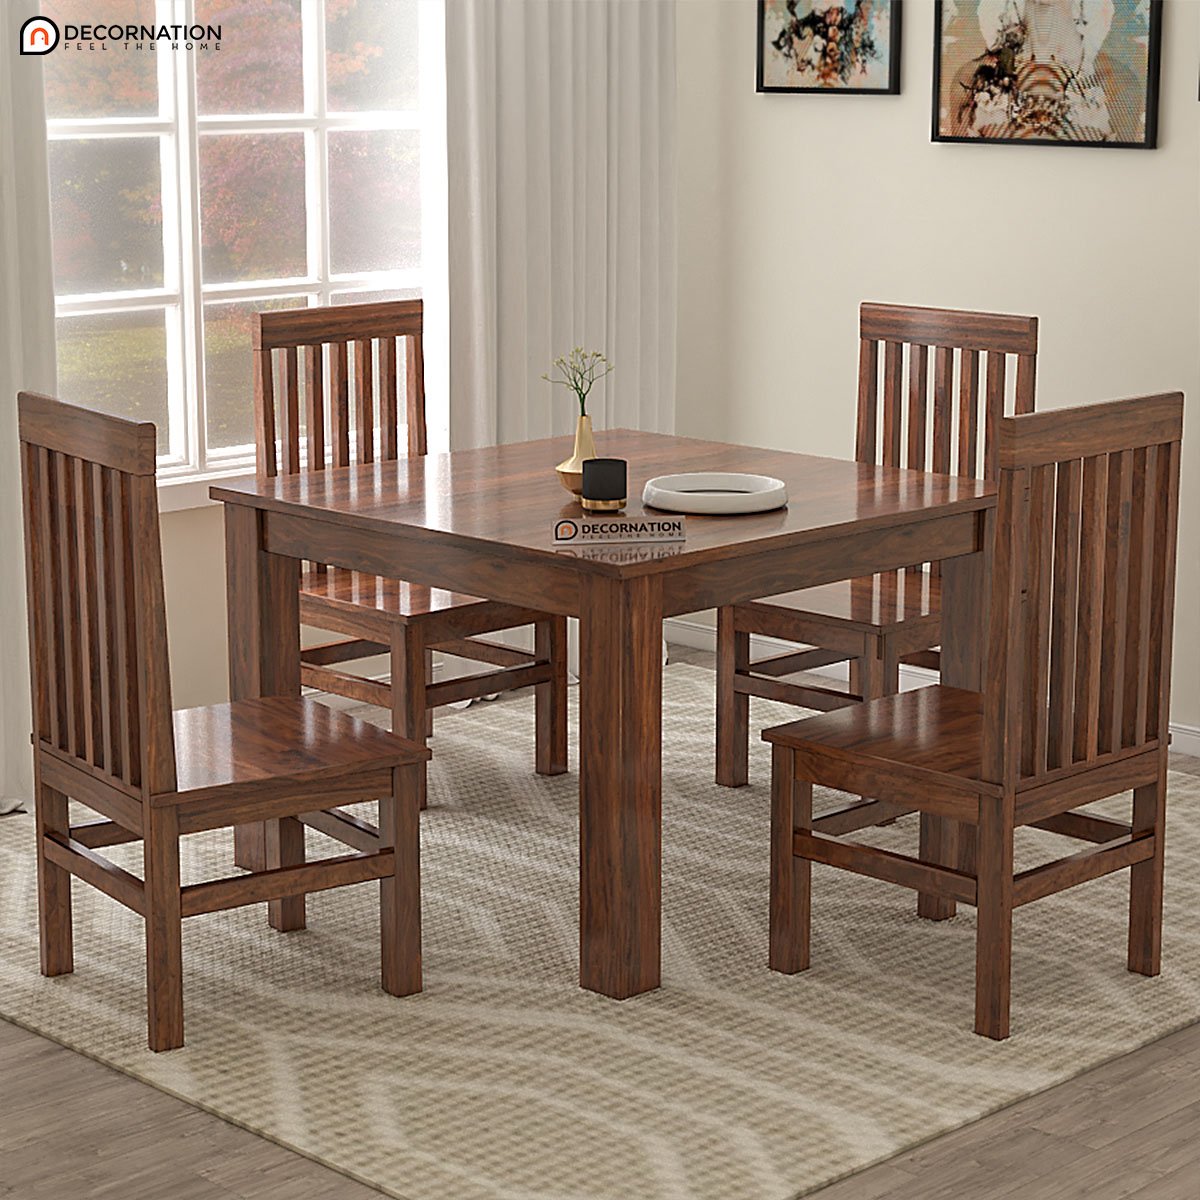 Bree Wooden 4 Seater Dining Table Set